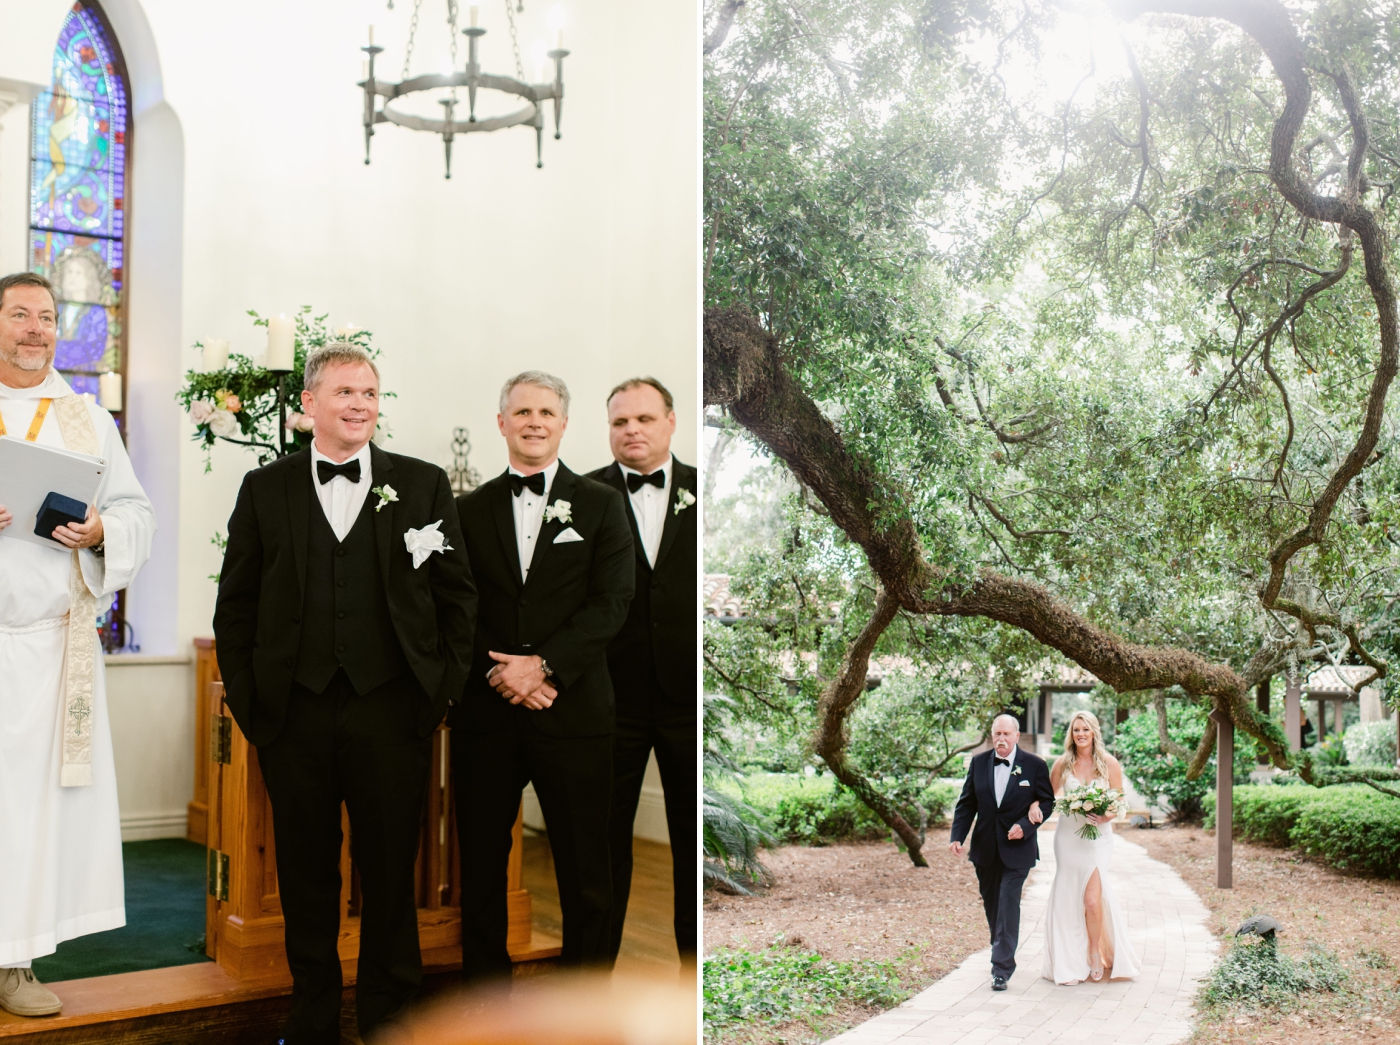 Wedding ceremony at The Cloister Chapel